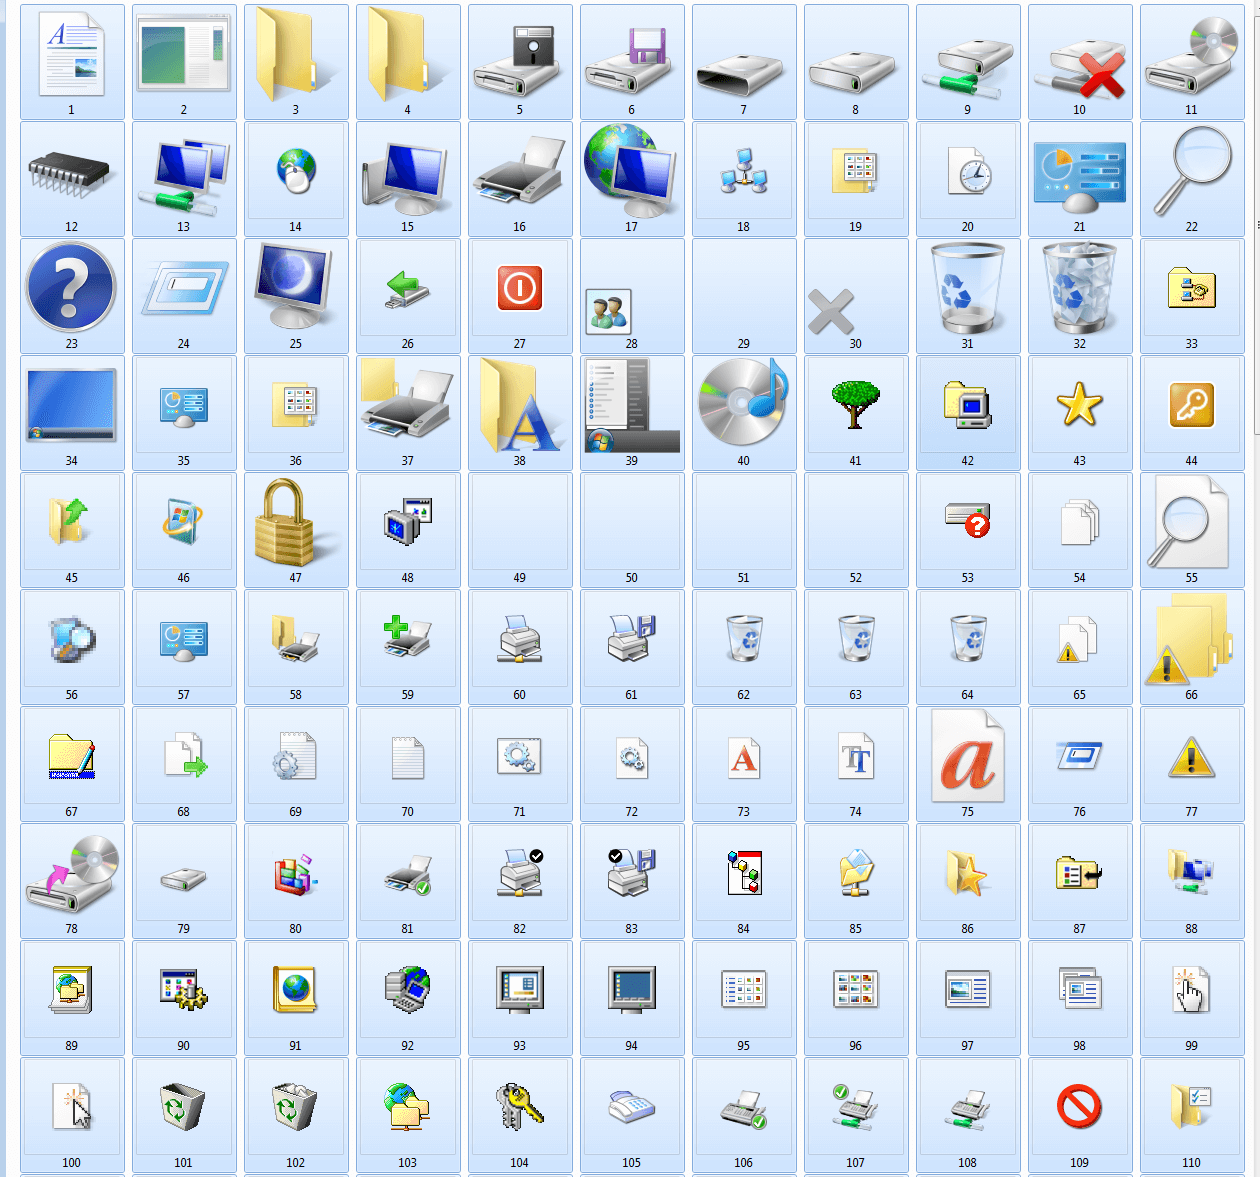 Windows 7 icons of shell32.dll (1/3)